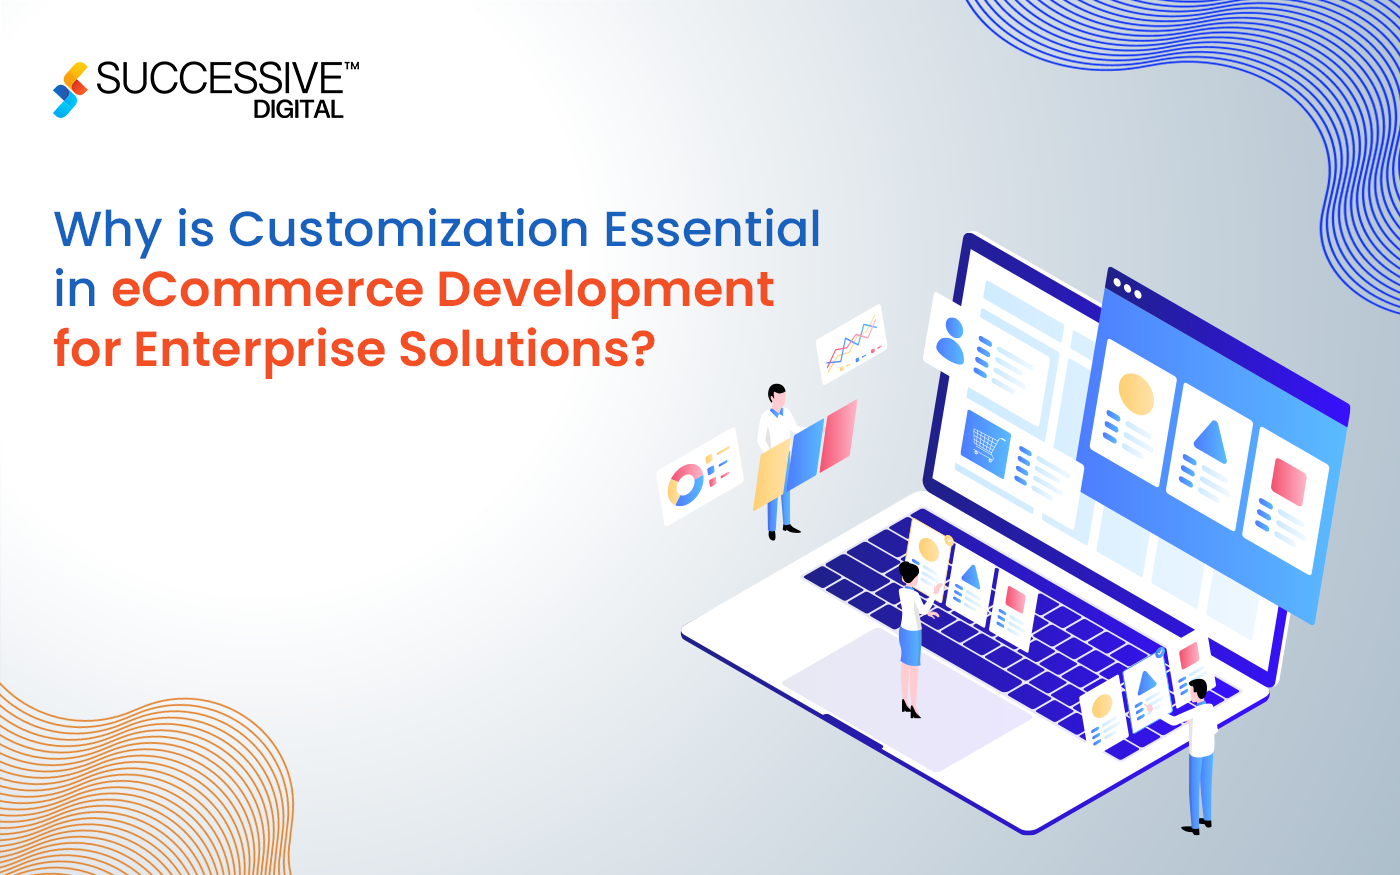 Why is Customization Essential in eCommerce Development for Enterprise Solutions?